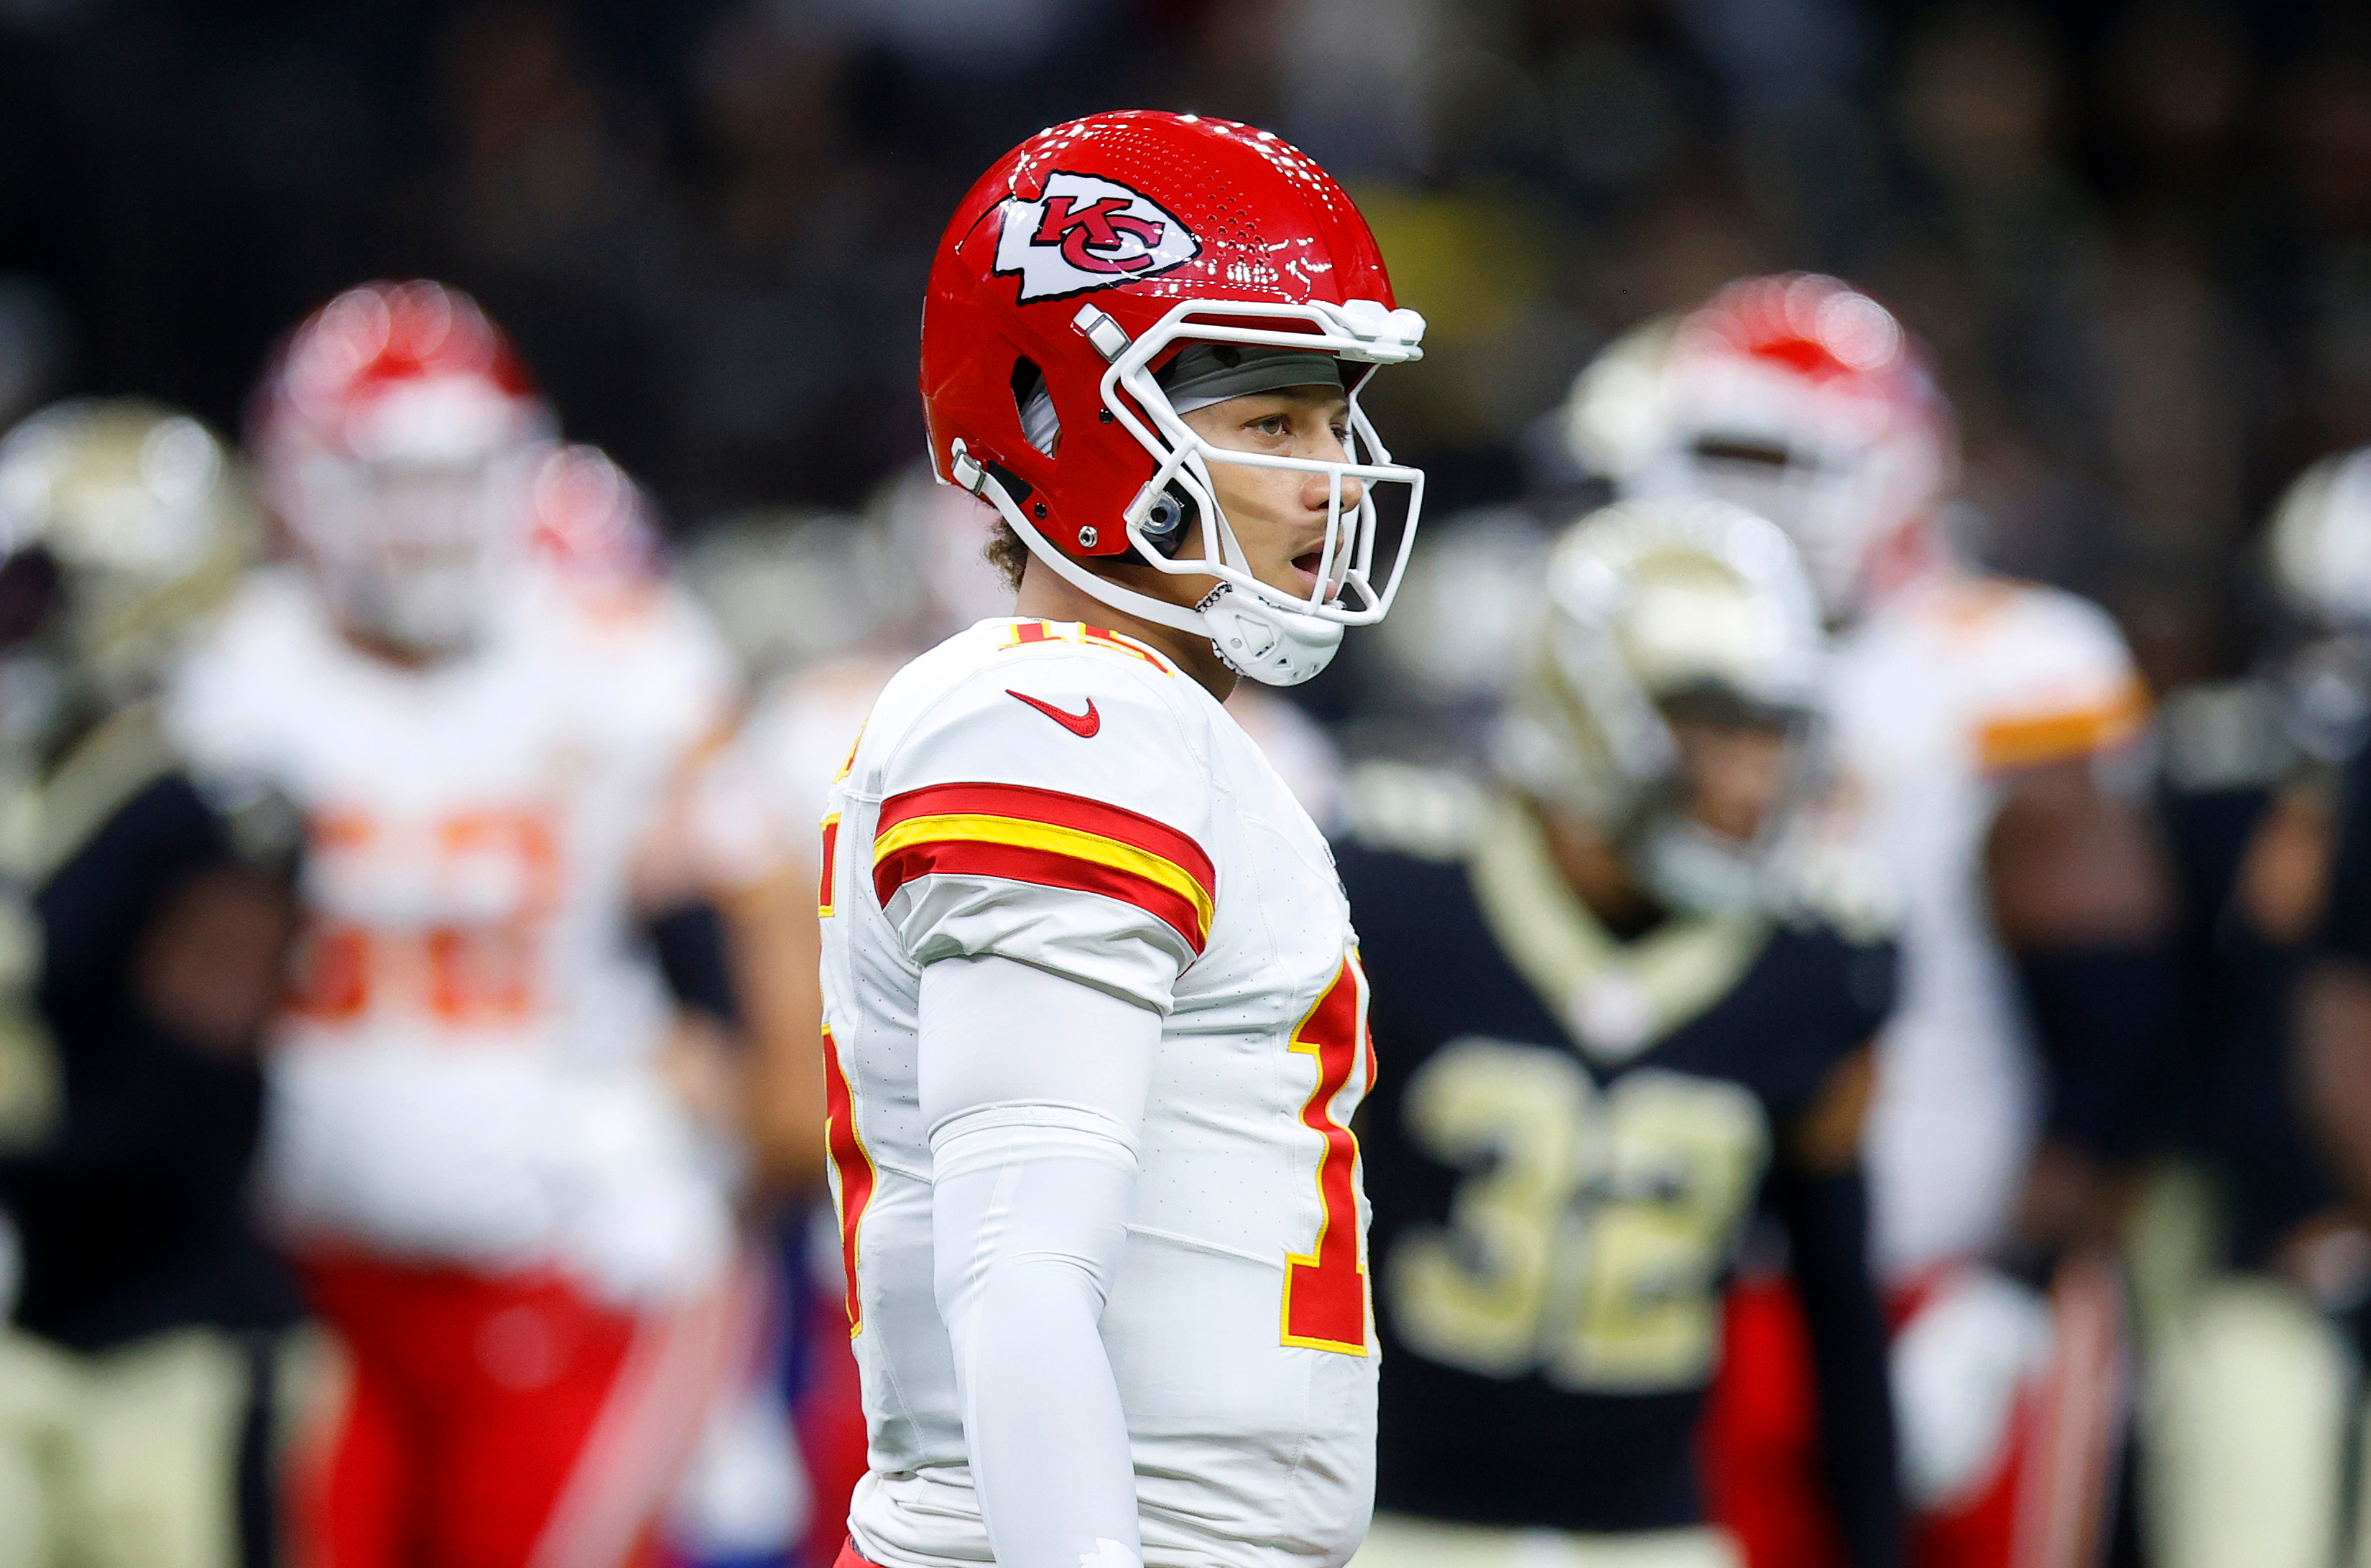 How to watch Chiefs vs. Cardinals: live stream, start time on